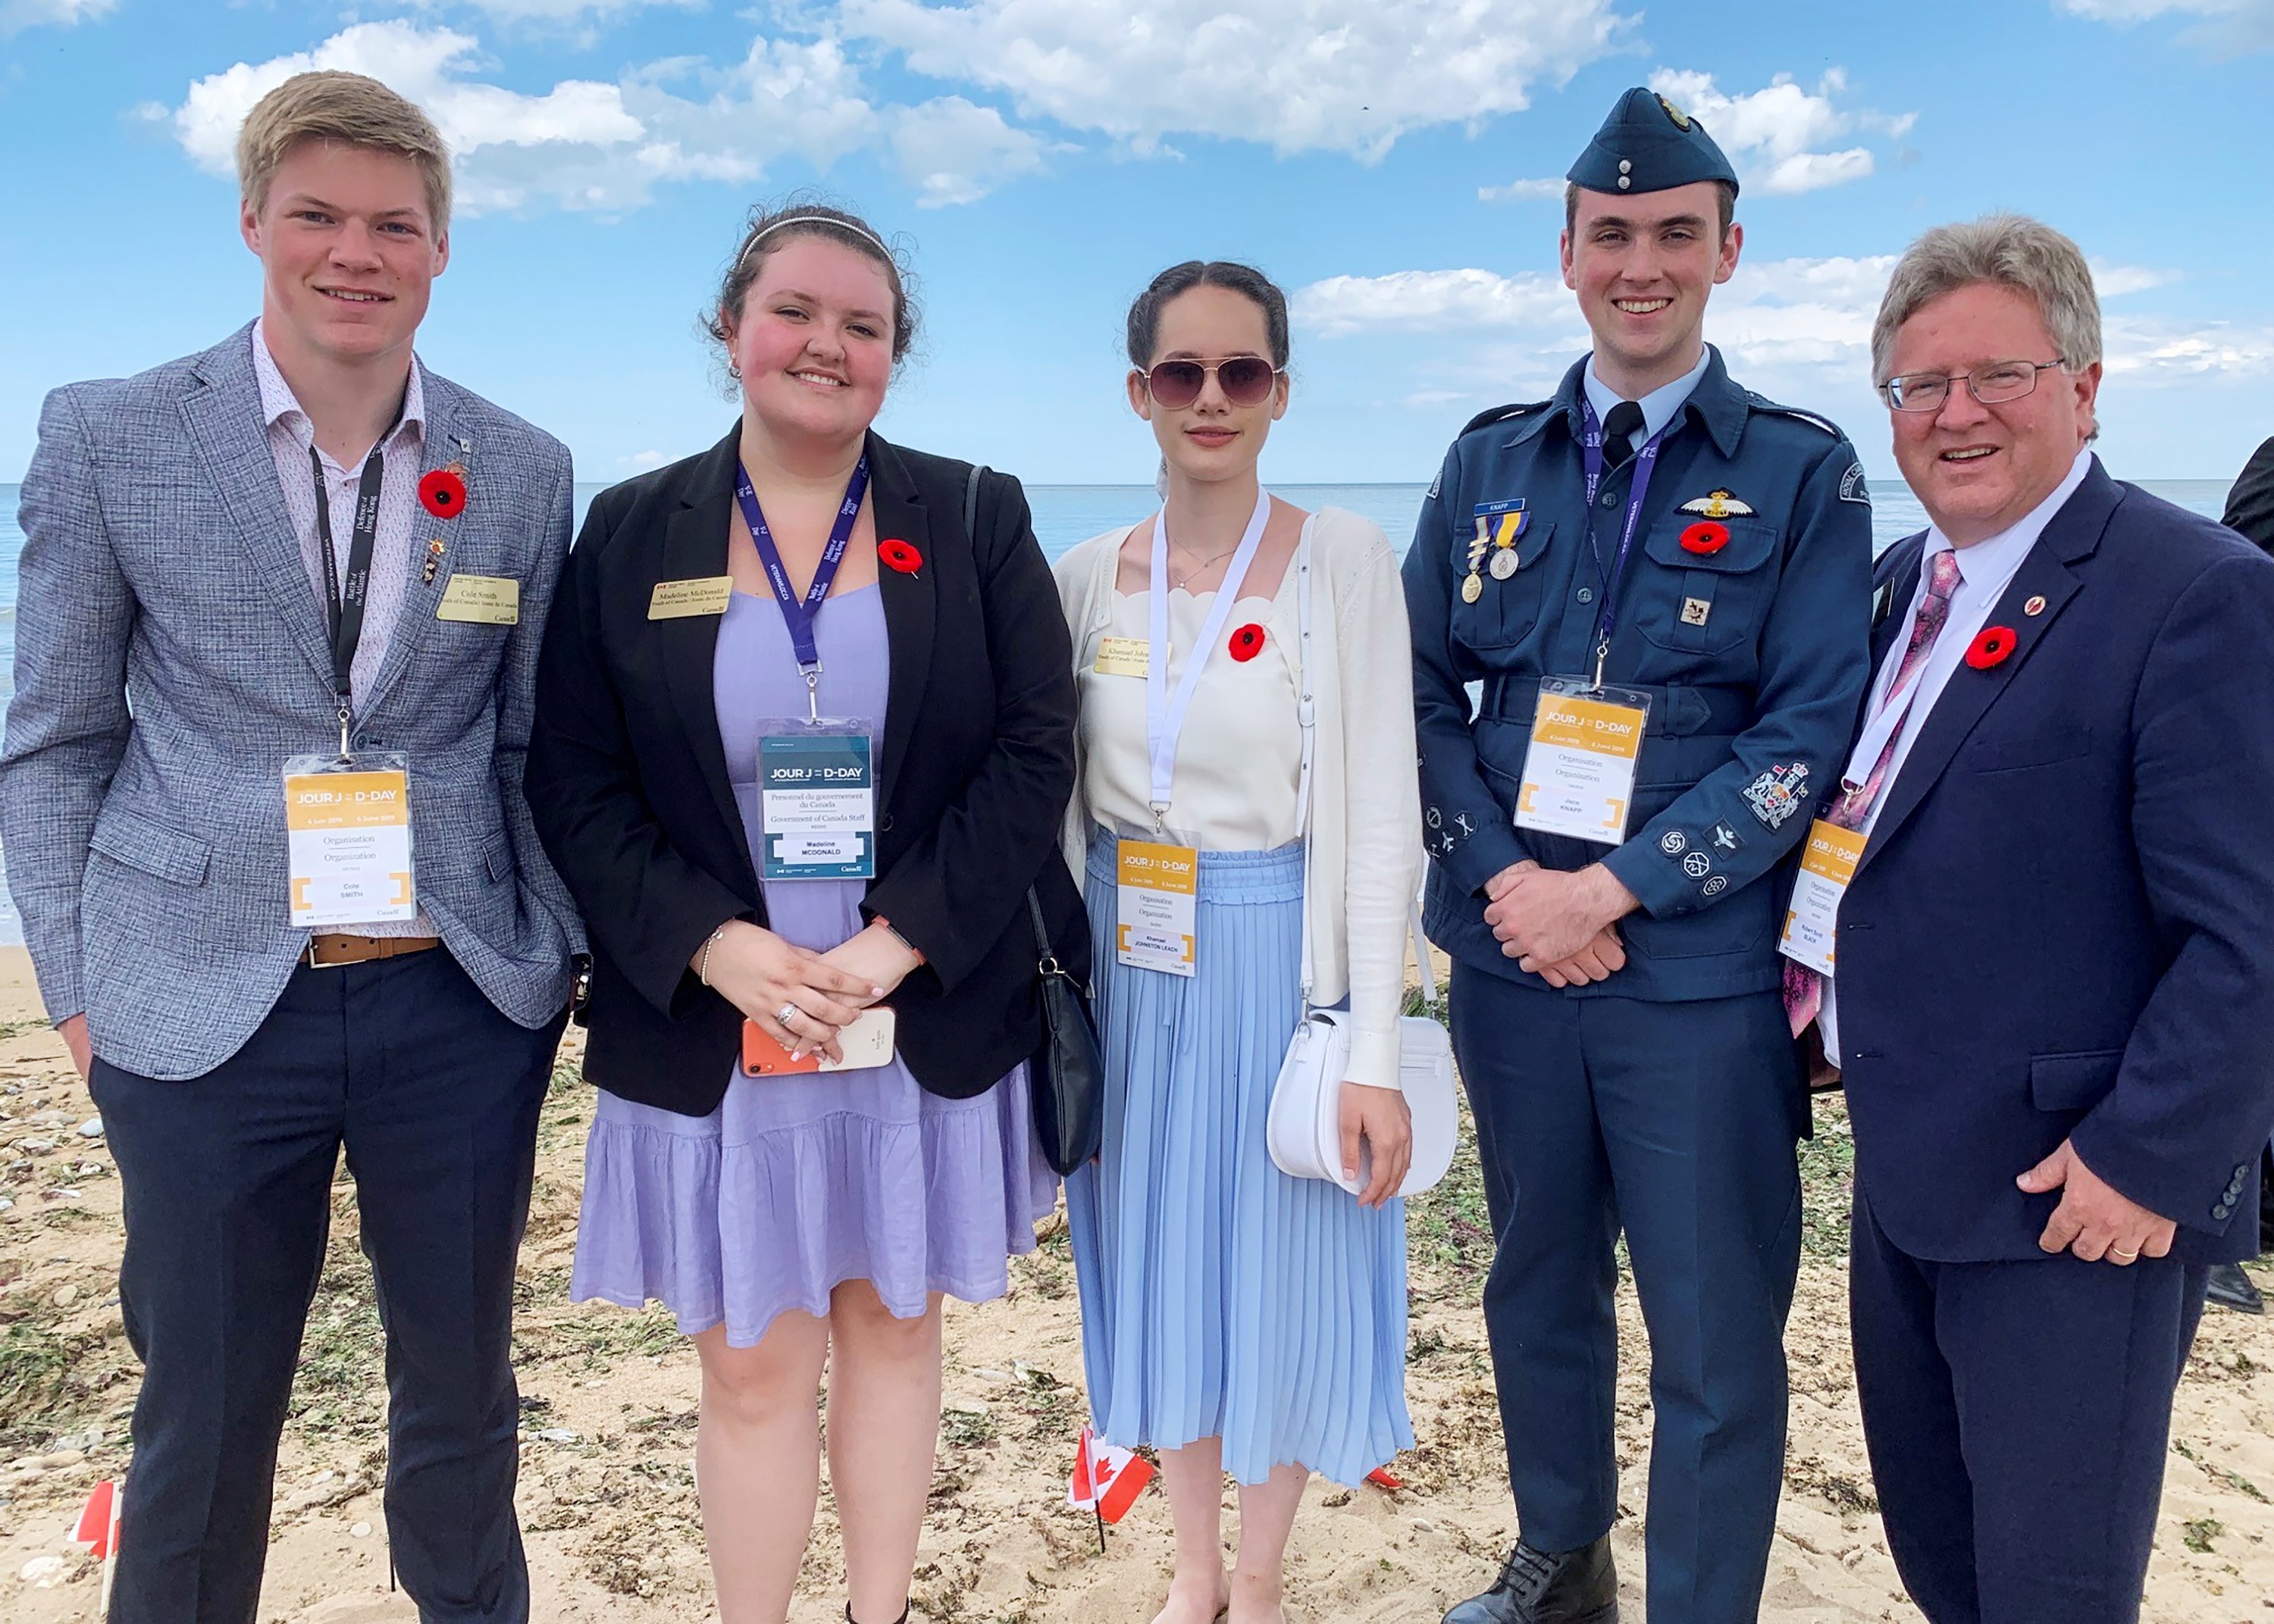 Thursday, June 6, 2019 — Senator Rob Black is joined in Normandy, France, by four Canadian youth delegates selected to accompany a government delegation to France to mark the 75th anniversary of D-Day and the Battle of Normandy. The delegation left for France on June 2 and spent a week at critical sites. The week included nine ceremonies at war cemeteries and memorials including Juno Beach on June 6th. From left to right, Cole Smith from Saskatchewan, Madeline McDonald and Khamael Johnston from British Columbia, and Jace Knapton from Alberta.